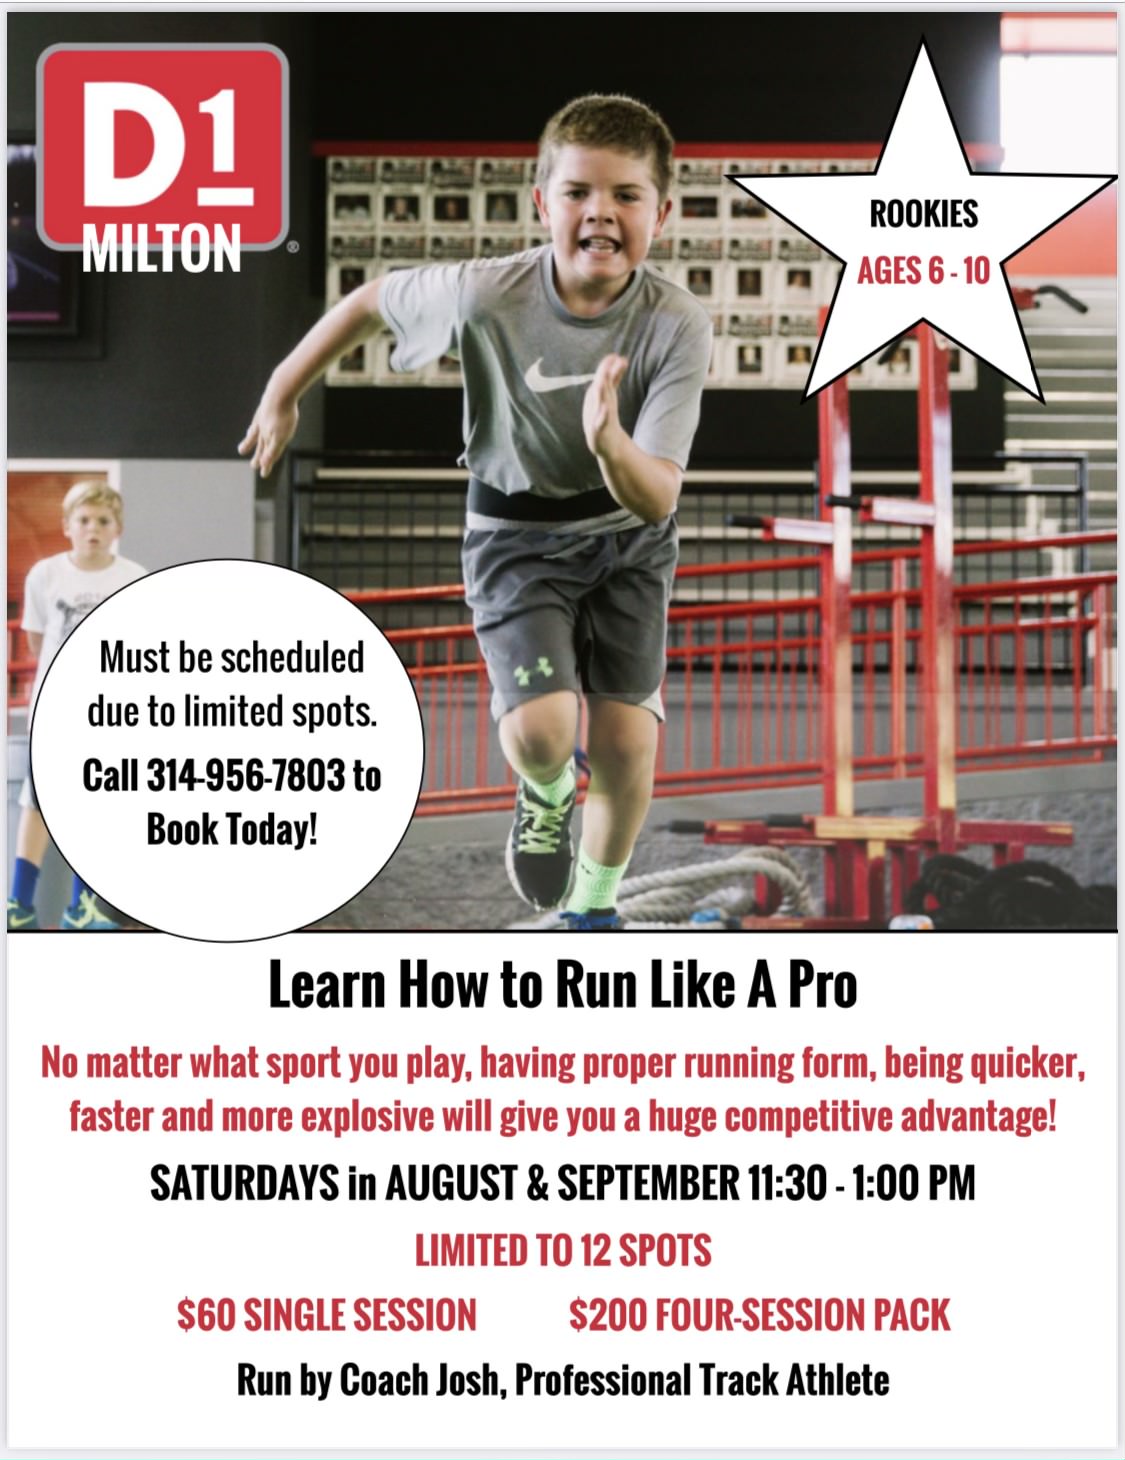 Learn to run like a pro camp flyer for rookies ages 6-10 Saturdays in August & September 11:30 - 1 pm